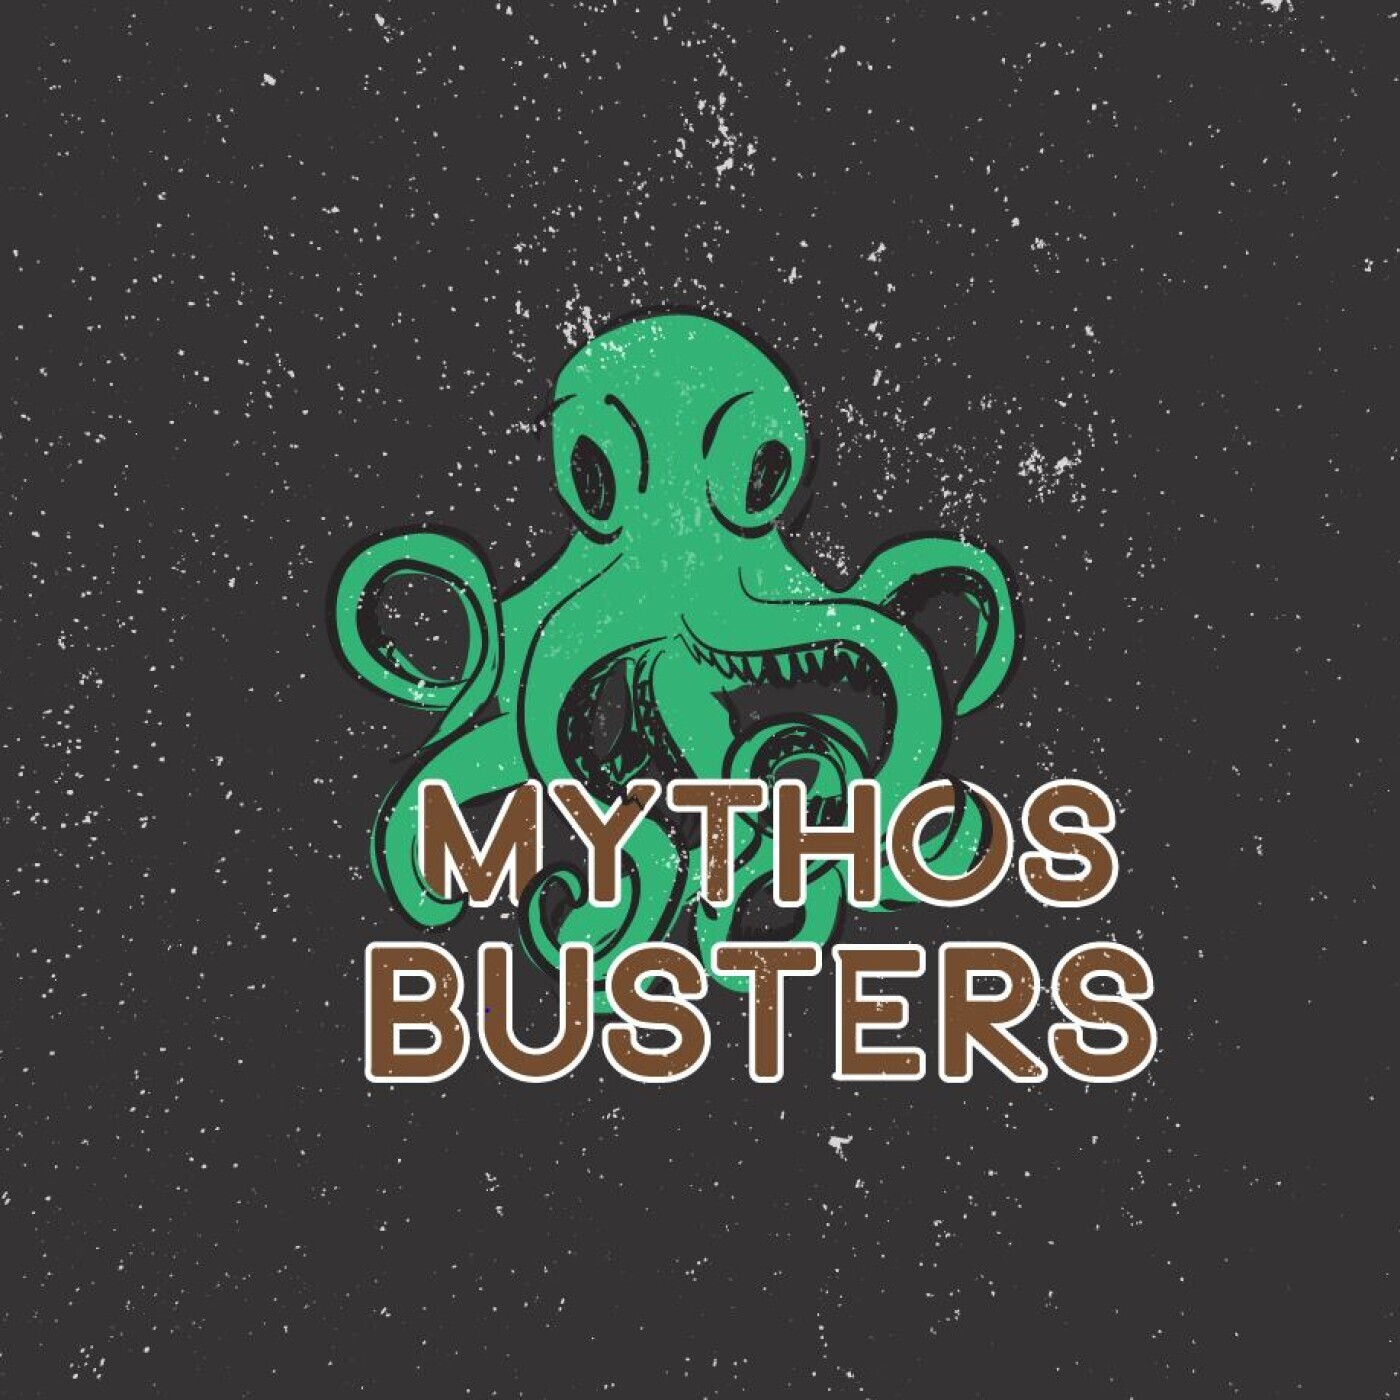 Mythos Busters 006: Spectacles, Tentacles, Wallet & Watch